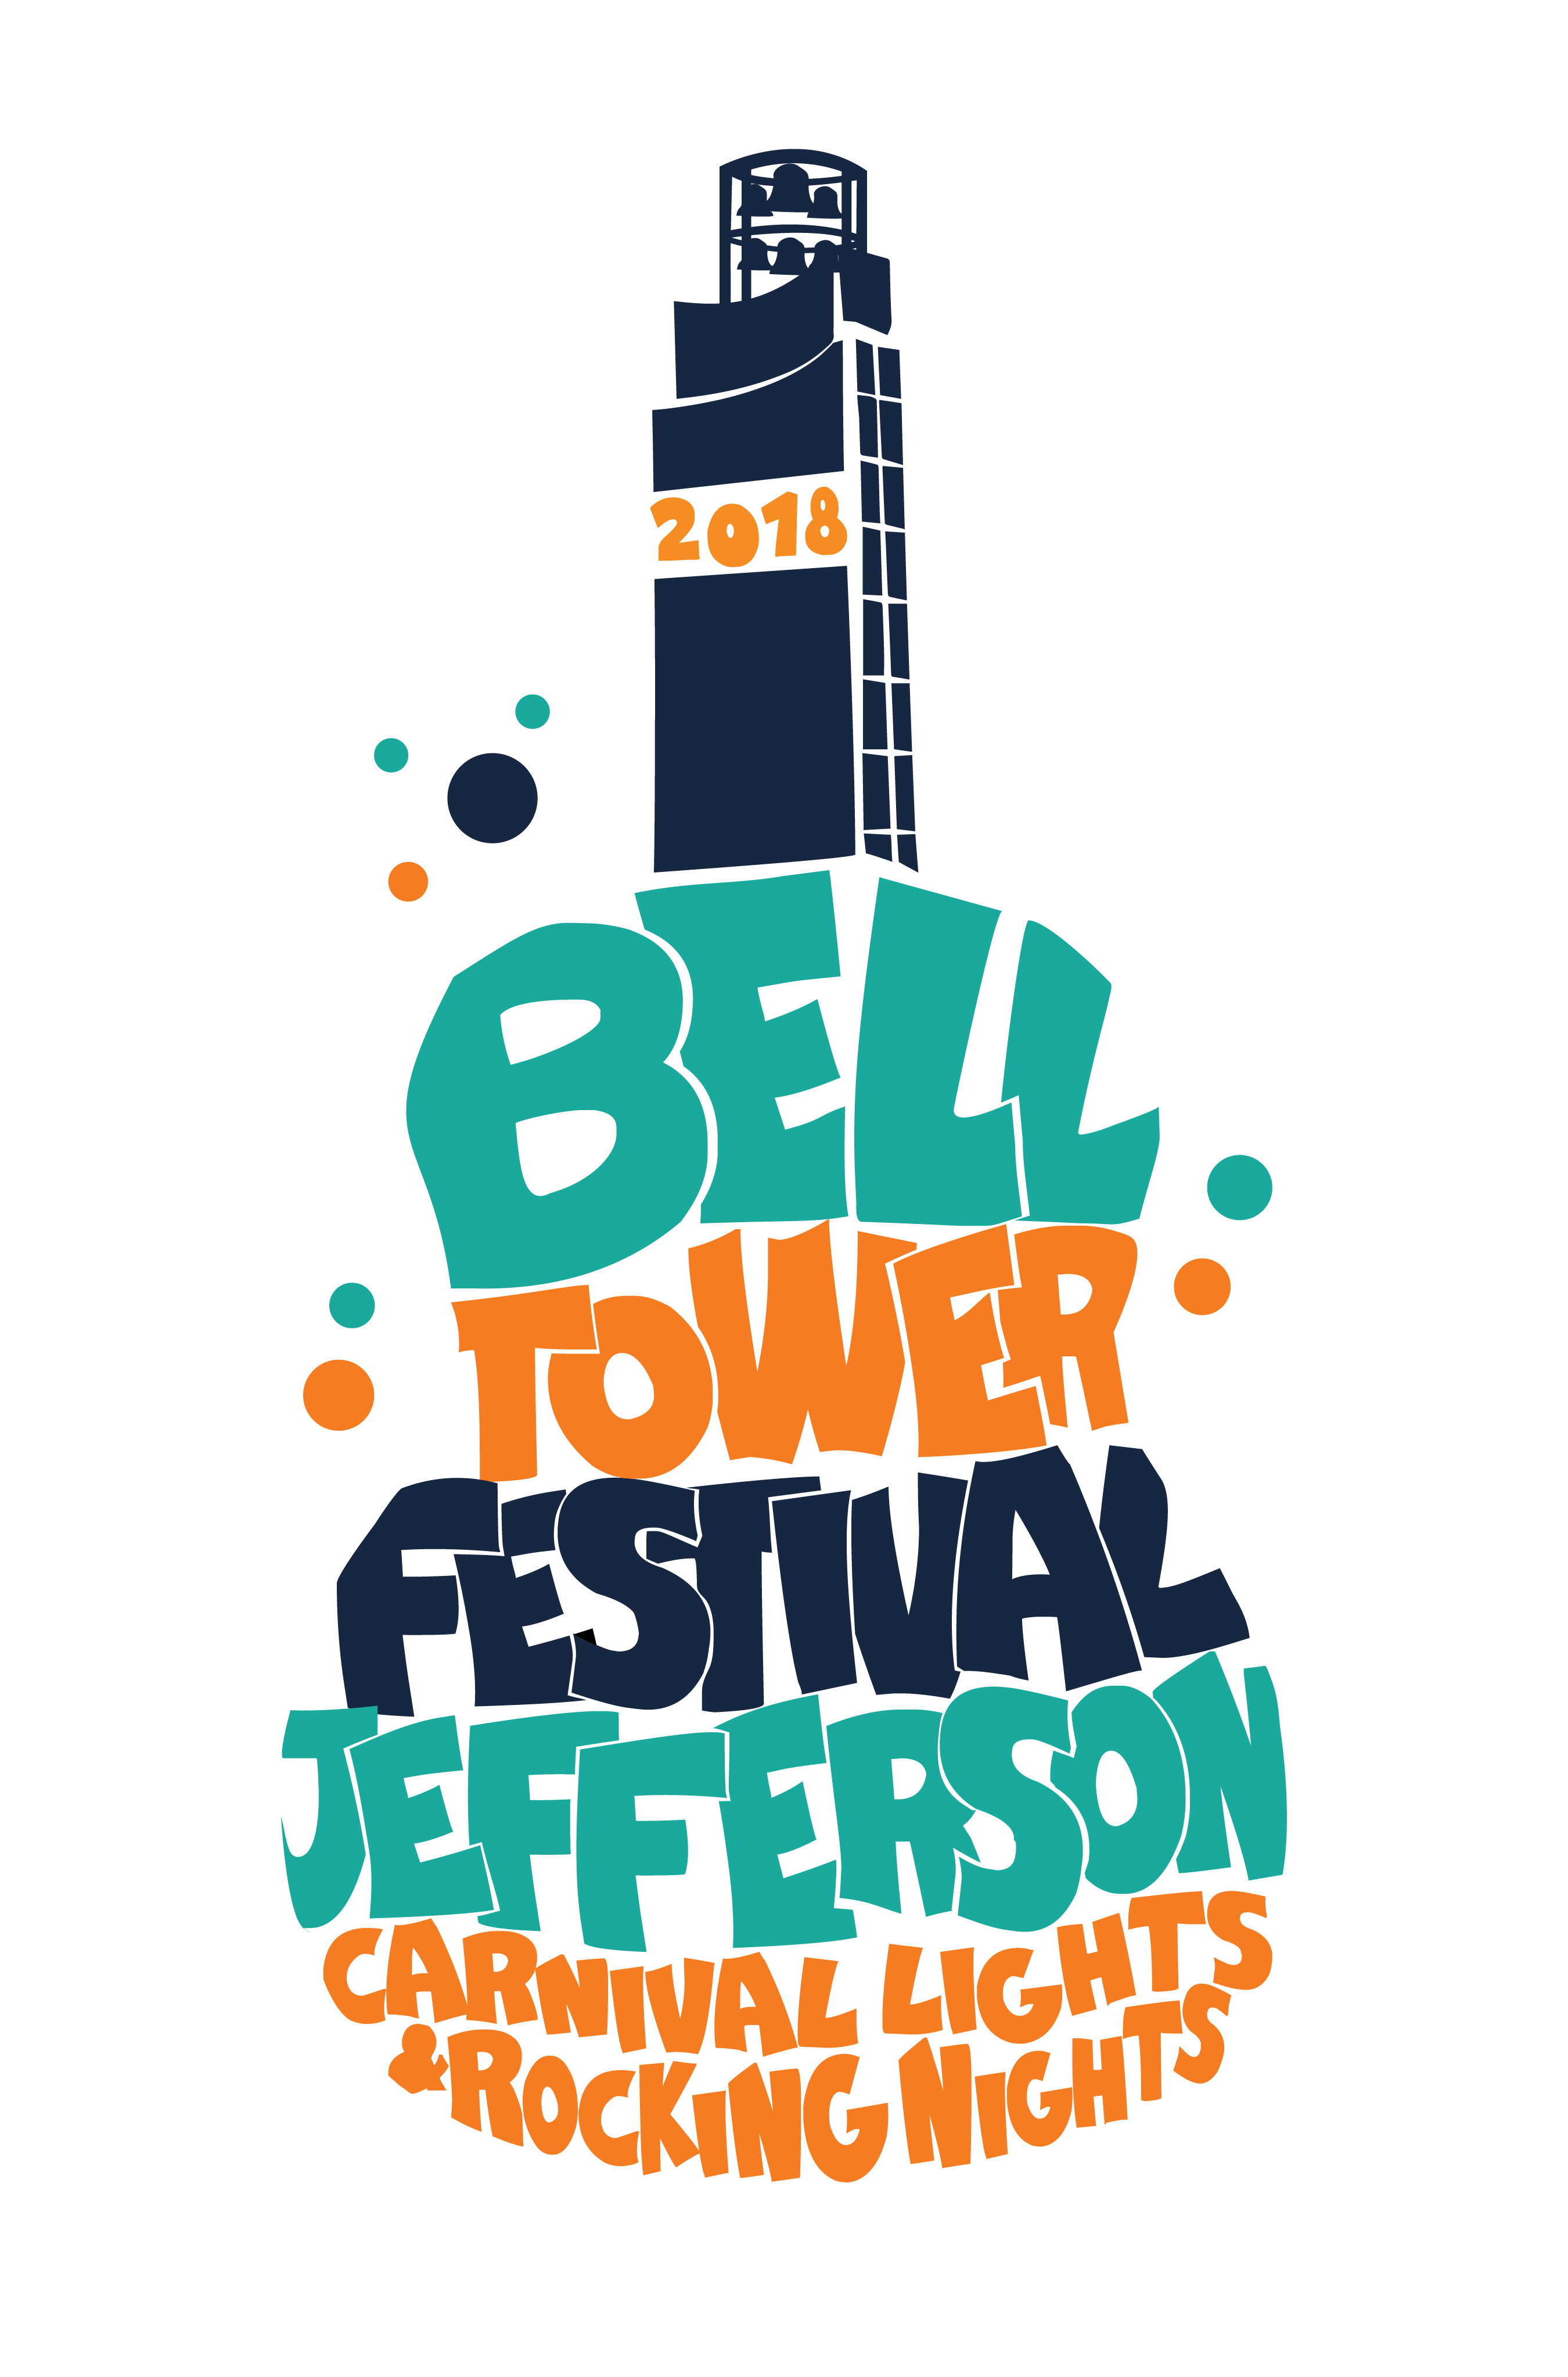 Saturday's Activities Are Overloaded at the Bell Tower Festival